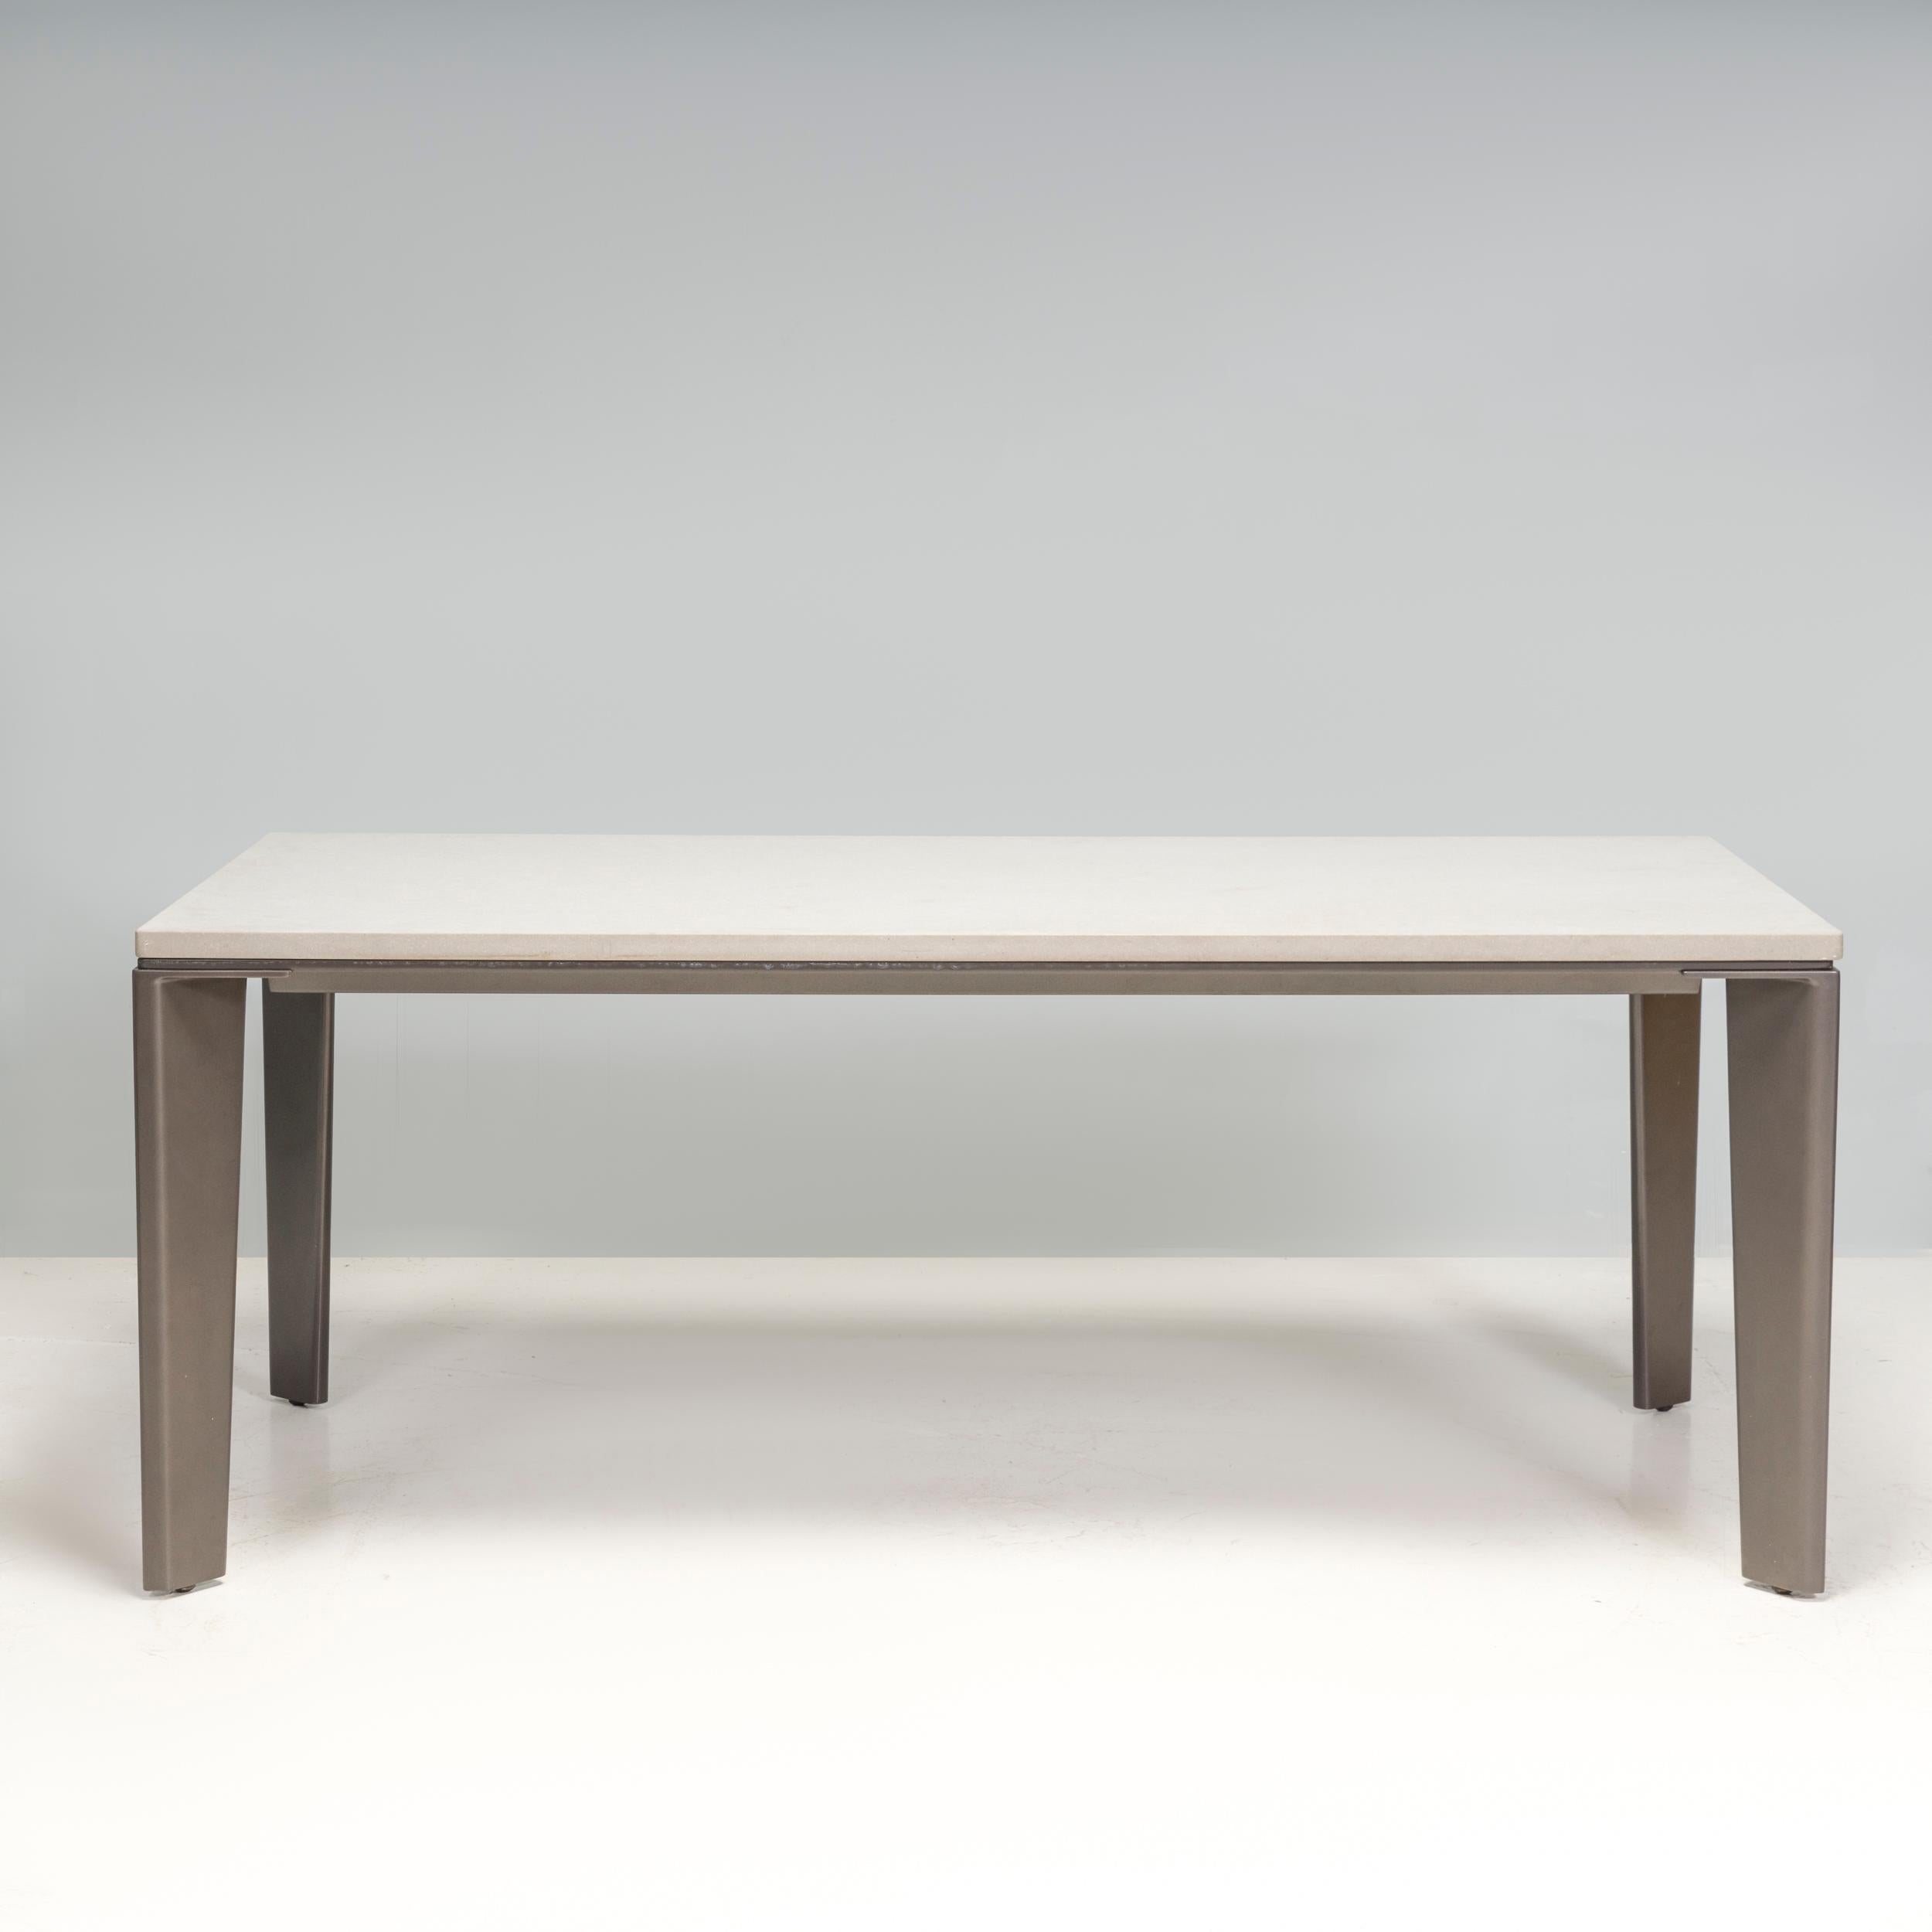  Holly Hunt Grey Keel Cement Outdoor Dining Table  For Sale 4